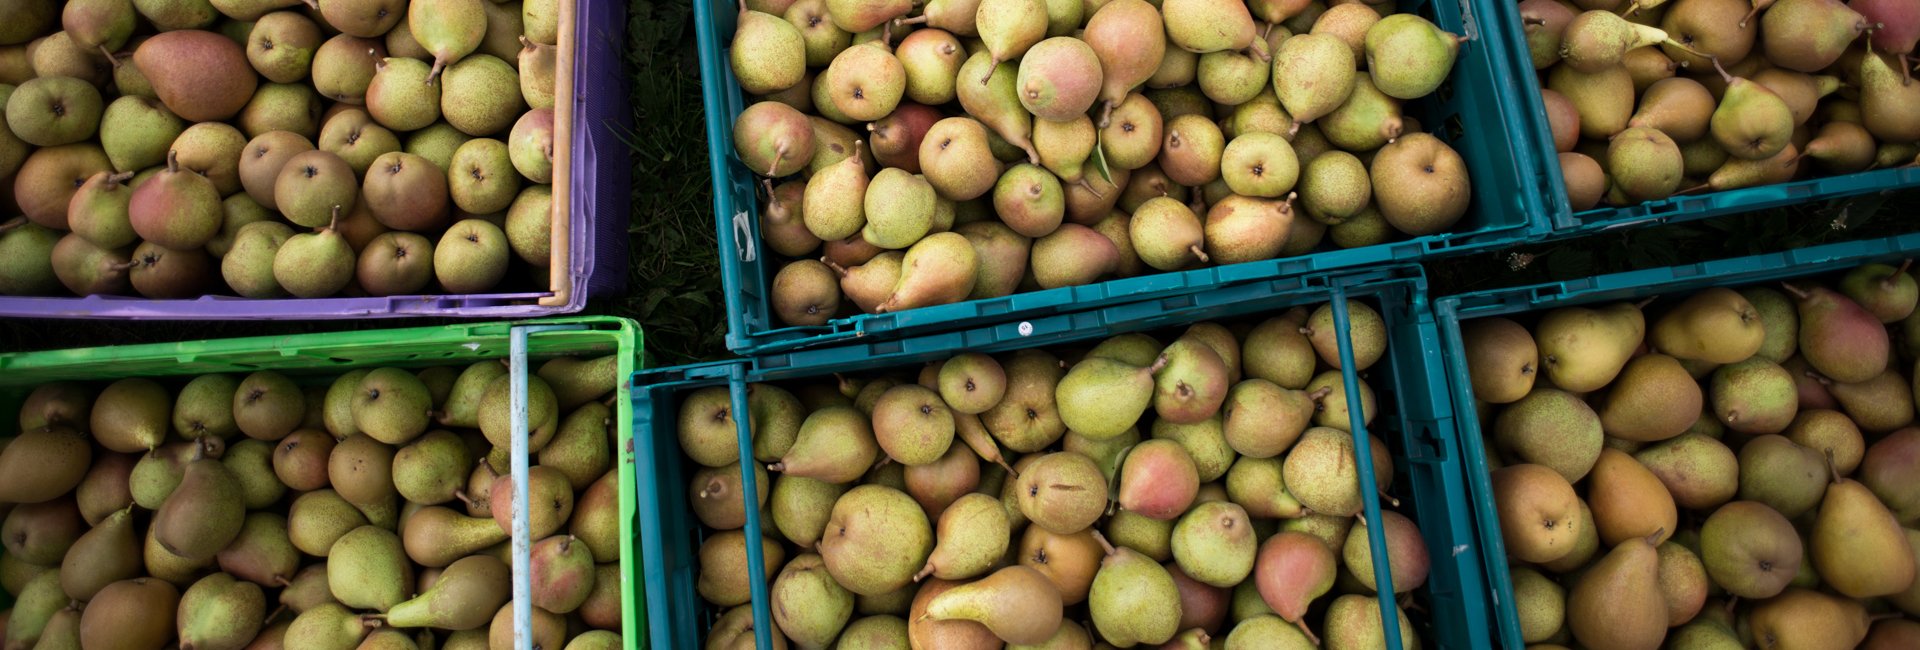 Food waste in the UK - Documenting gleaning by photographer Chris King